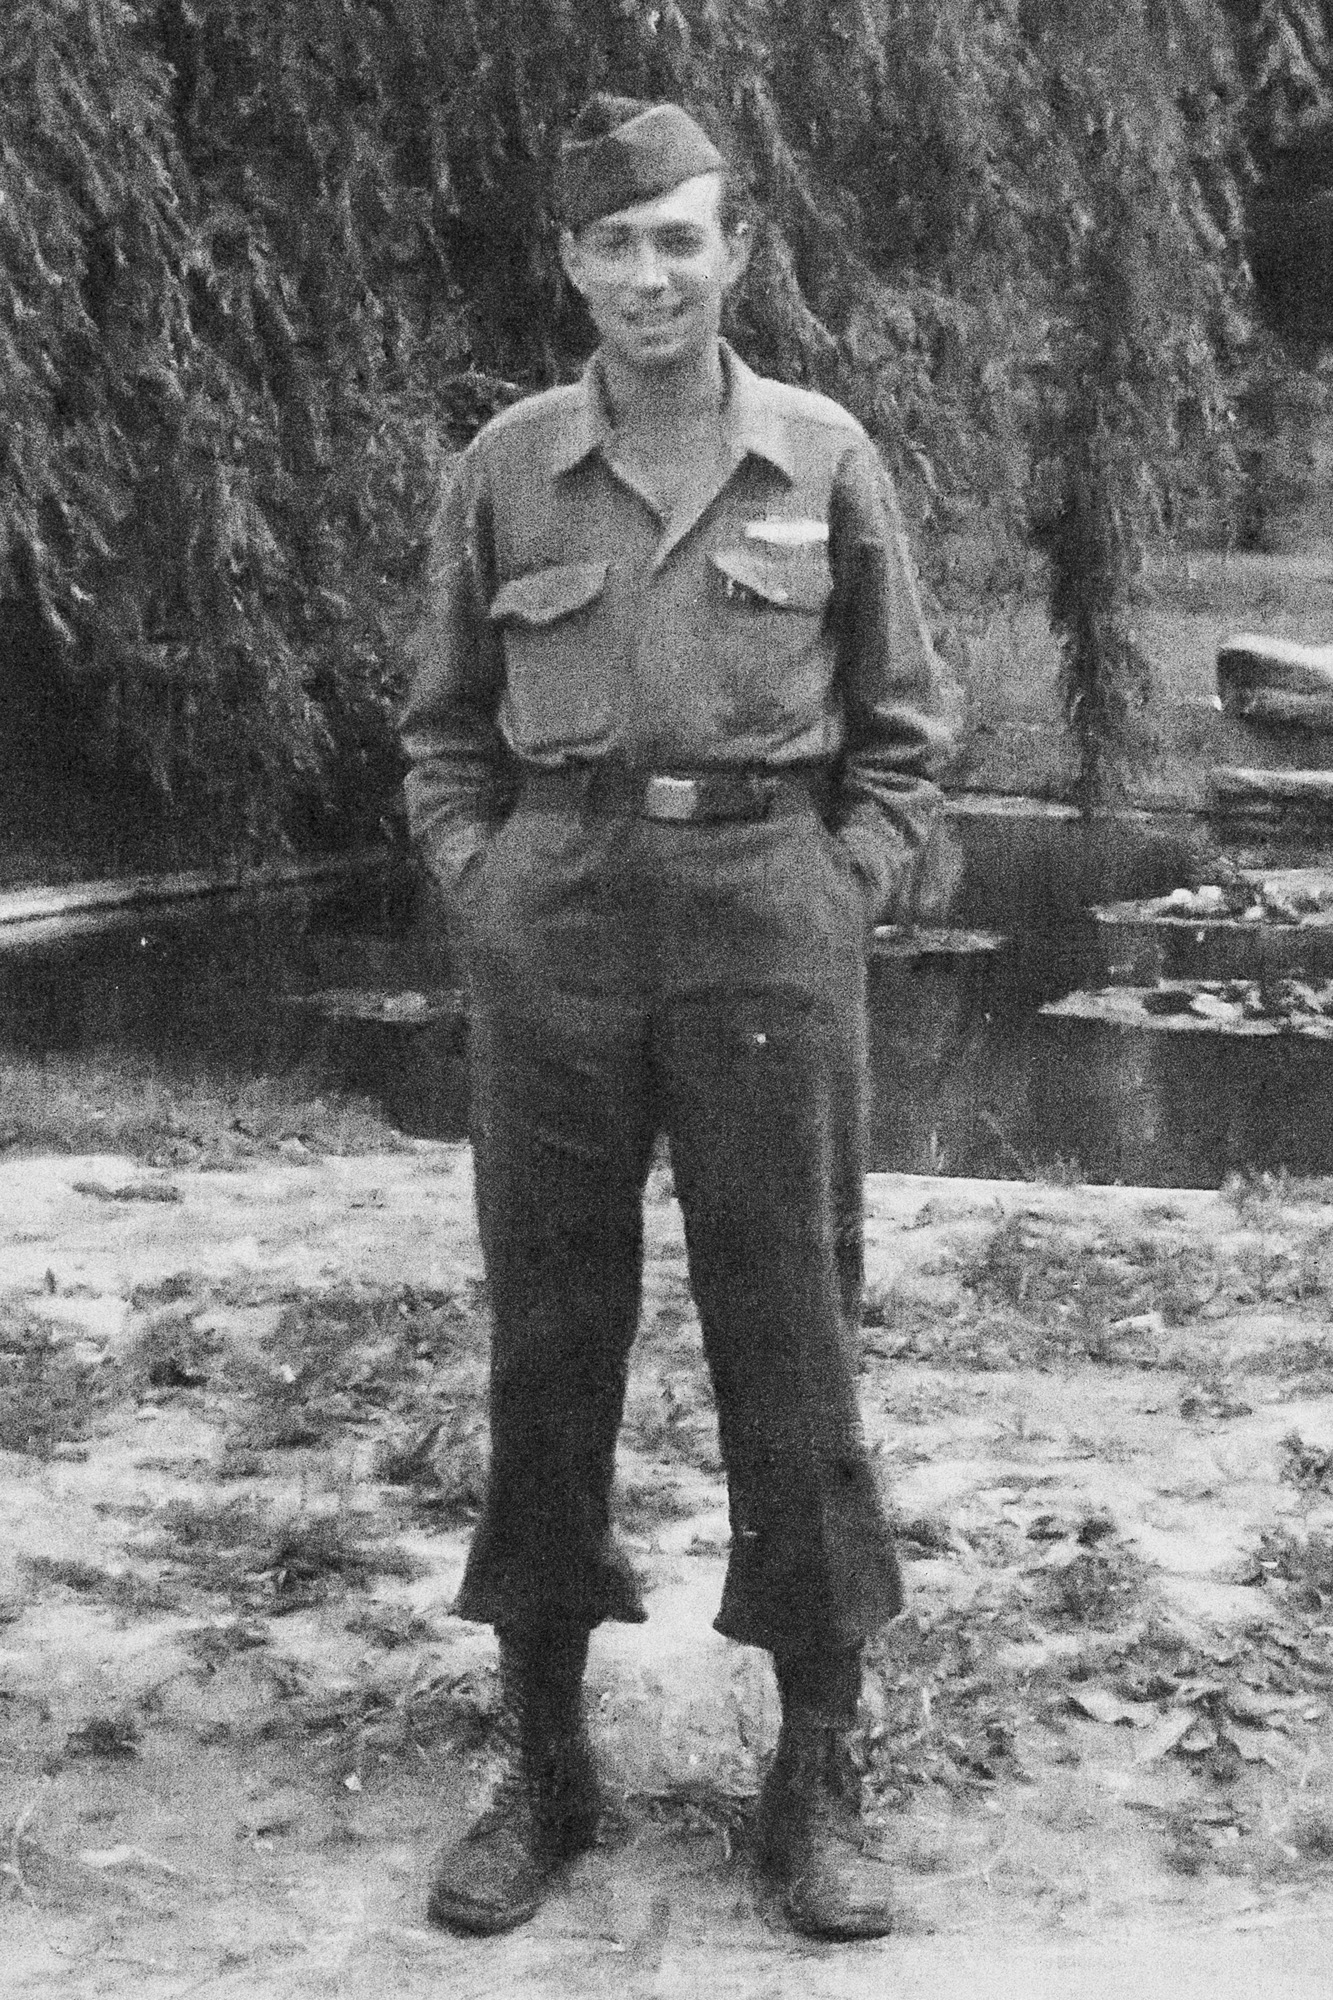 Dale Cooksey in his uniform, fighting in WWII